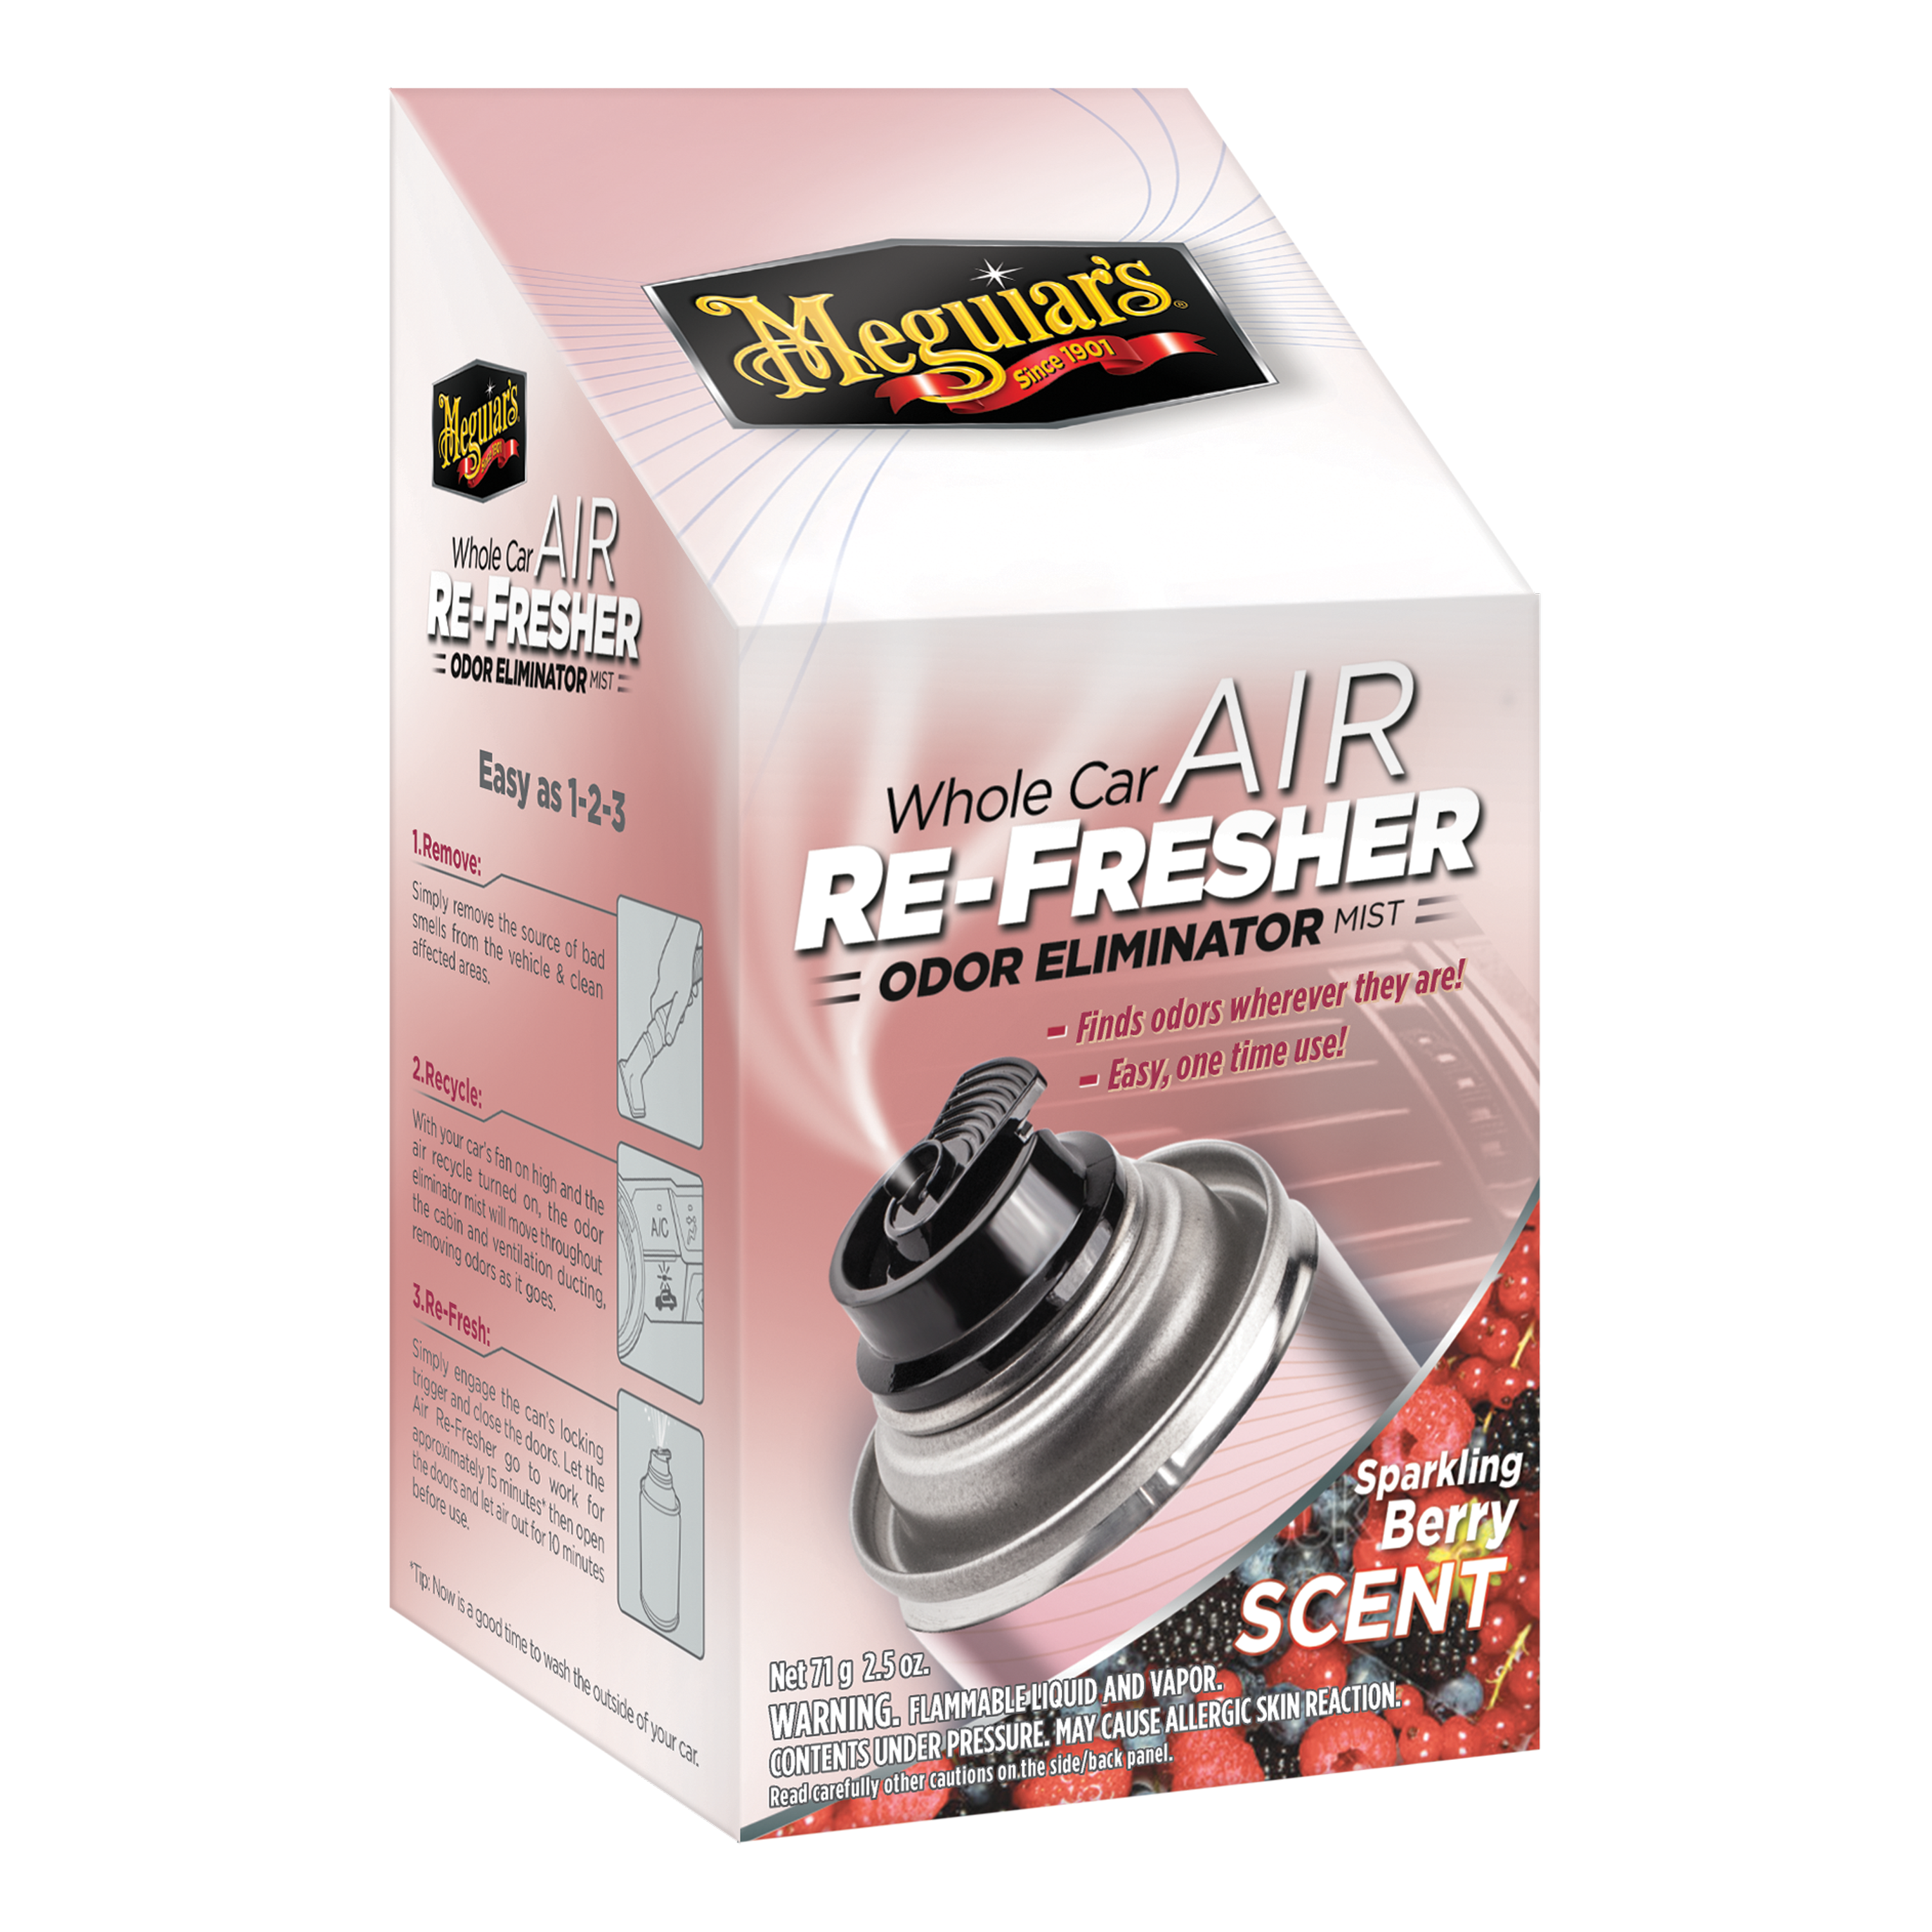 Whole Car Air ReFresher (Sparkling Berry)